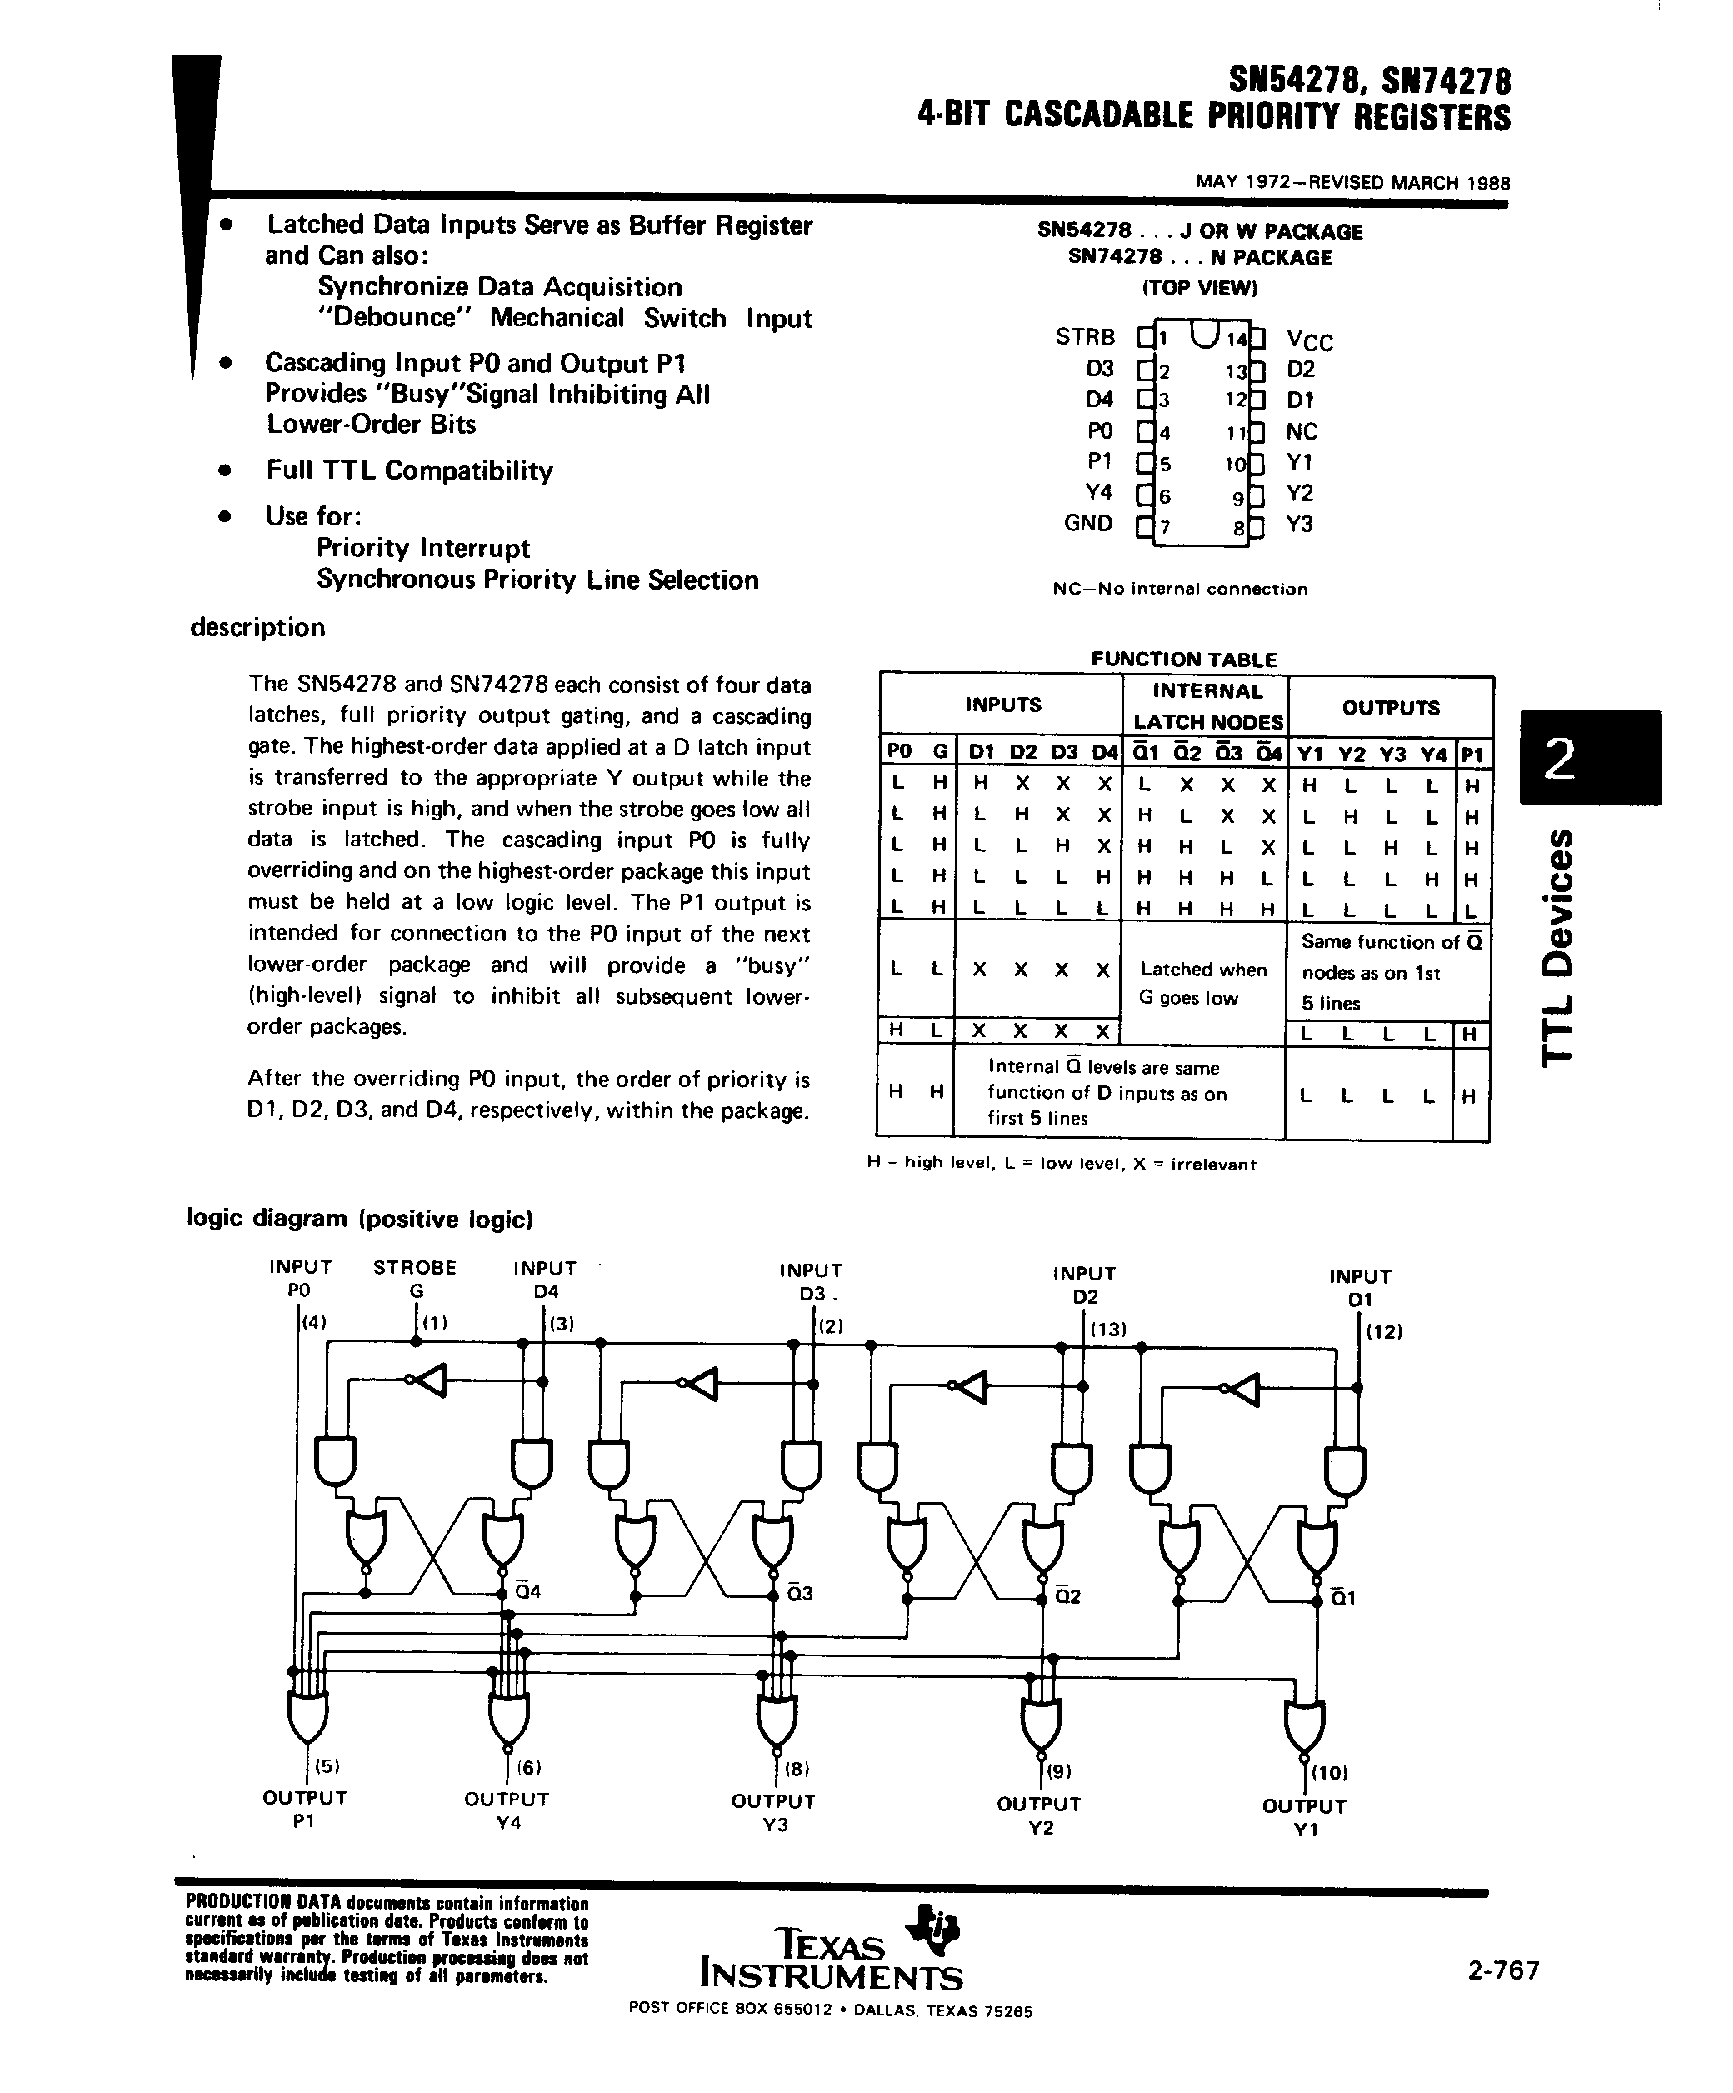 Datasheet SN74278 - 4 Bit Cascadable Priority Registers page 1